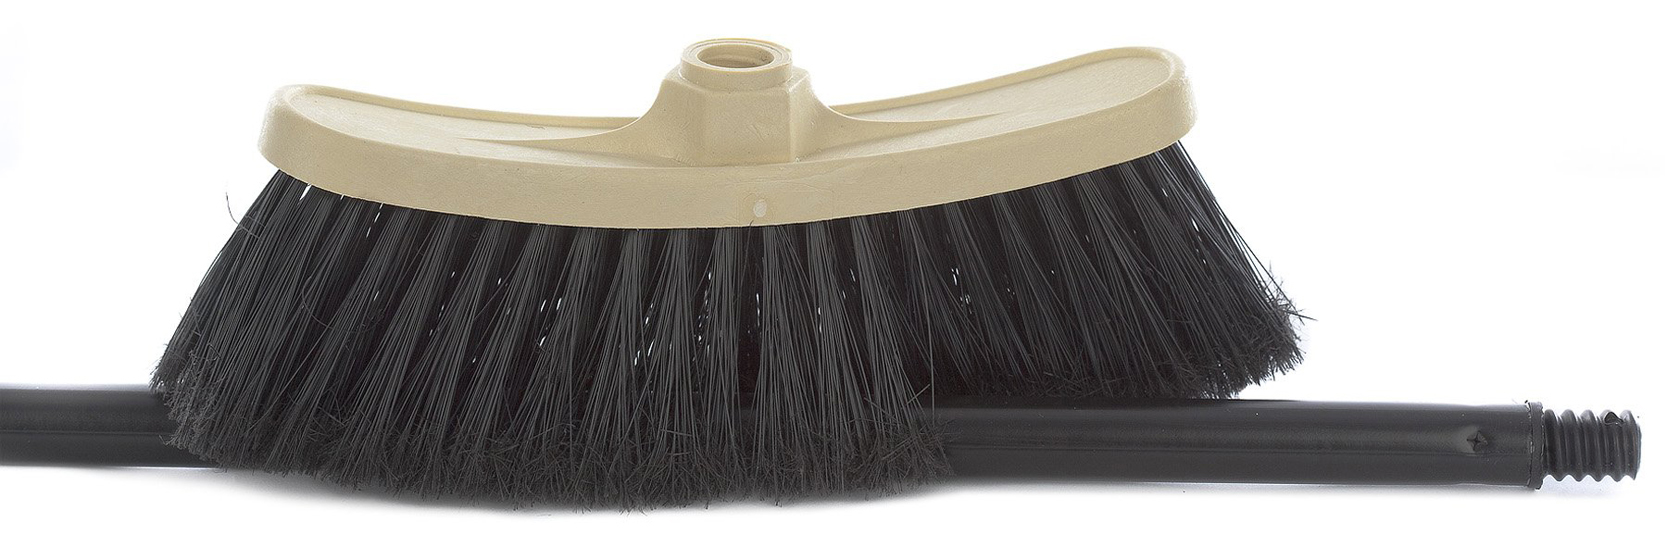 48" Atlas Graham® Magnetic Upright Broom & Handle, Soft Synthetic